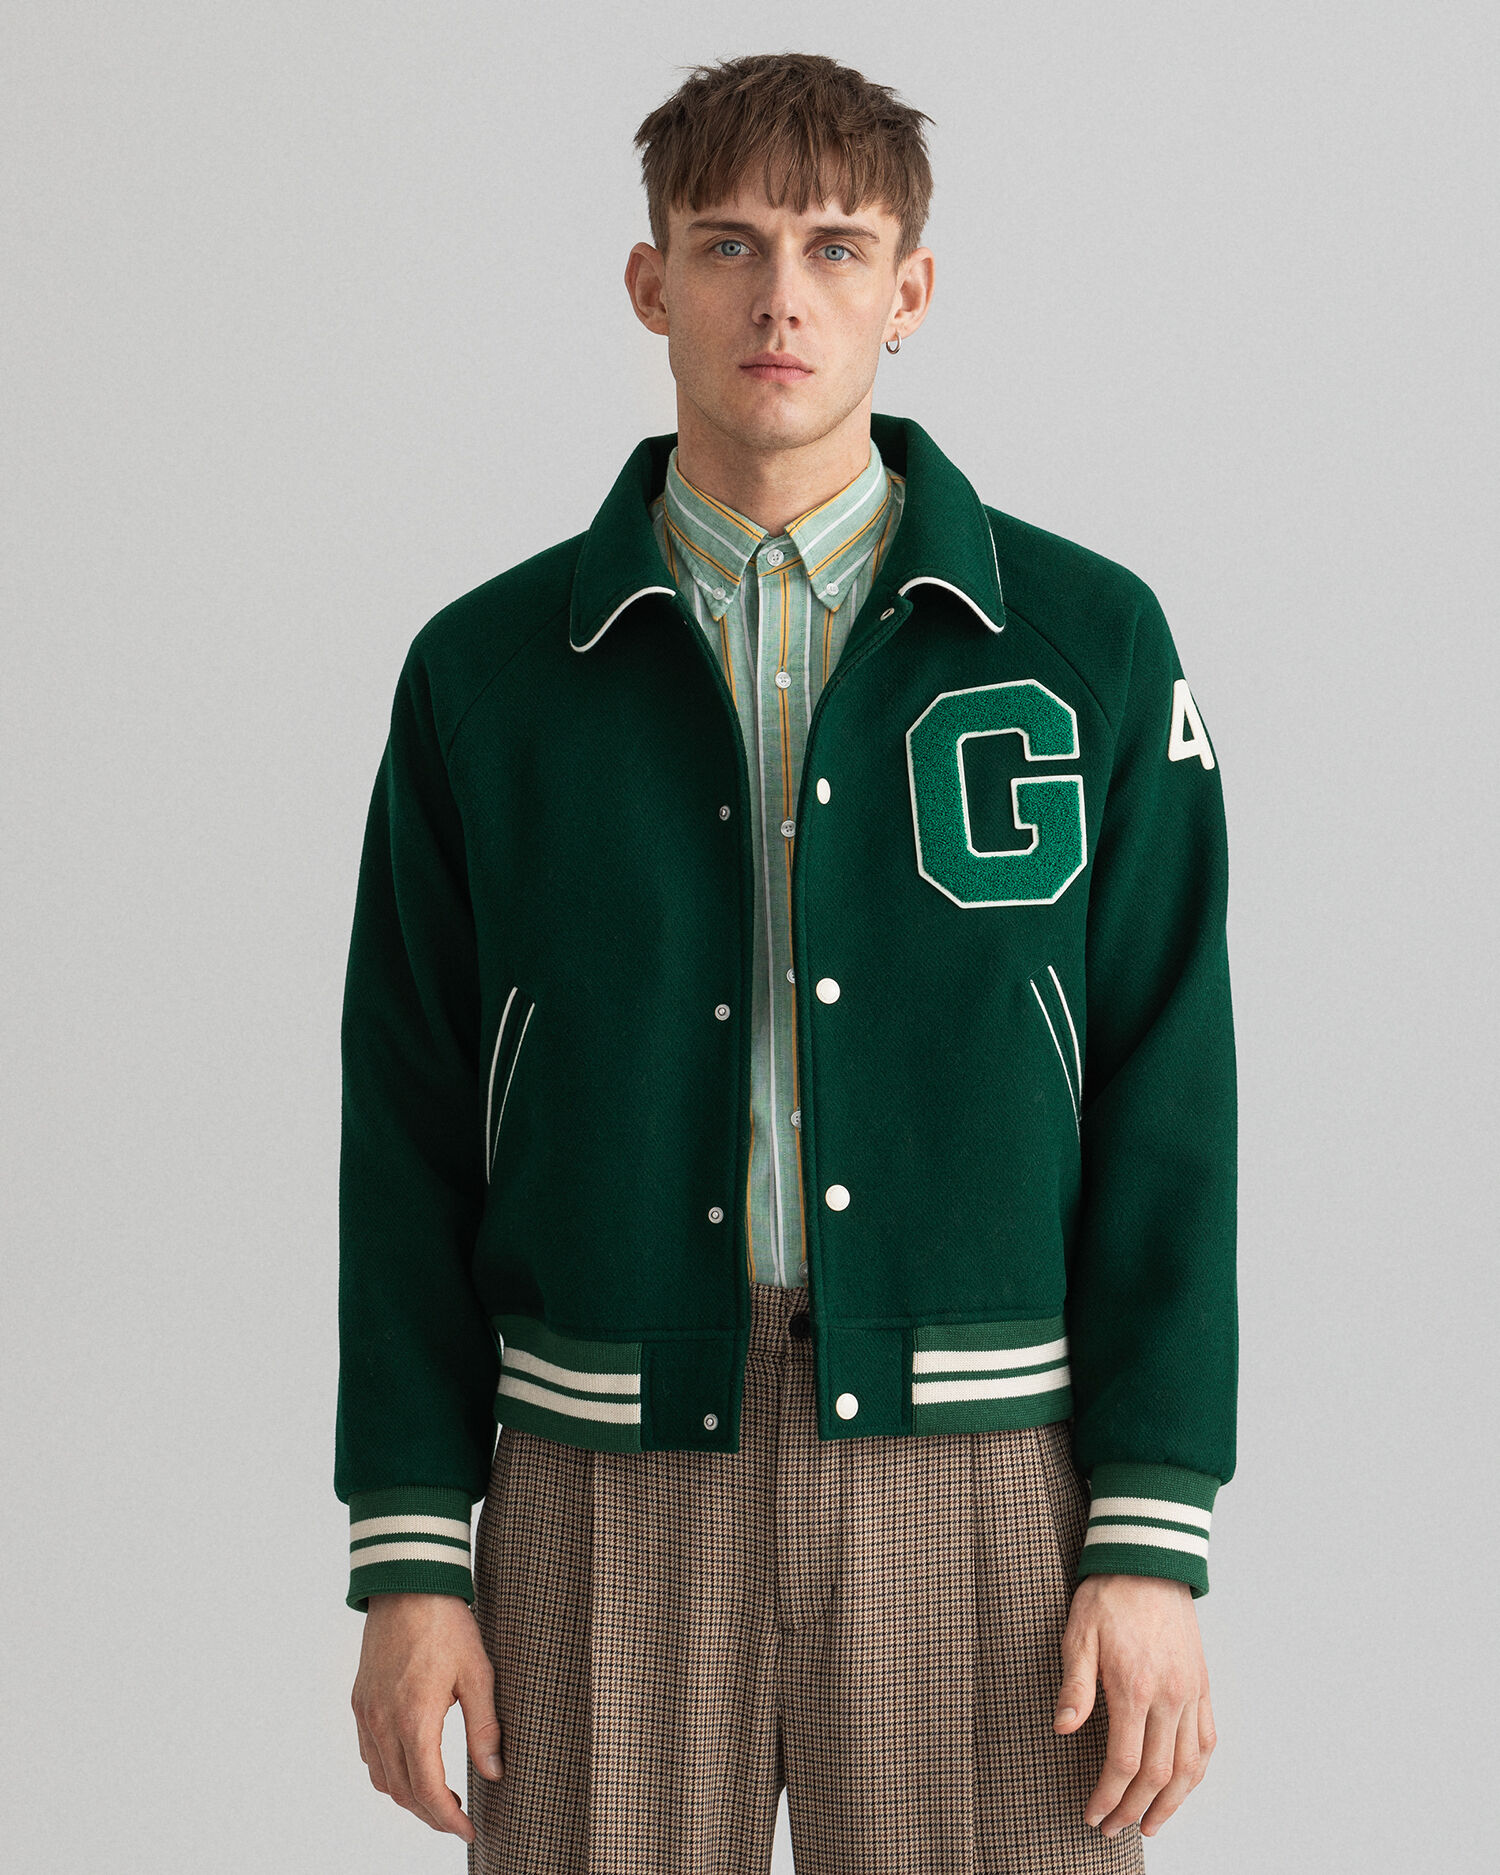 Vintage Green Oversized Varsity Jaket Baseball Oversize With S Letter  Embroidery For Men And Women Leather Sleeves, Baggy Style Uniform For  Autumn HKD230815 From Chancee, $39.03 | DHgate.Com